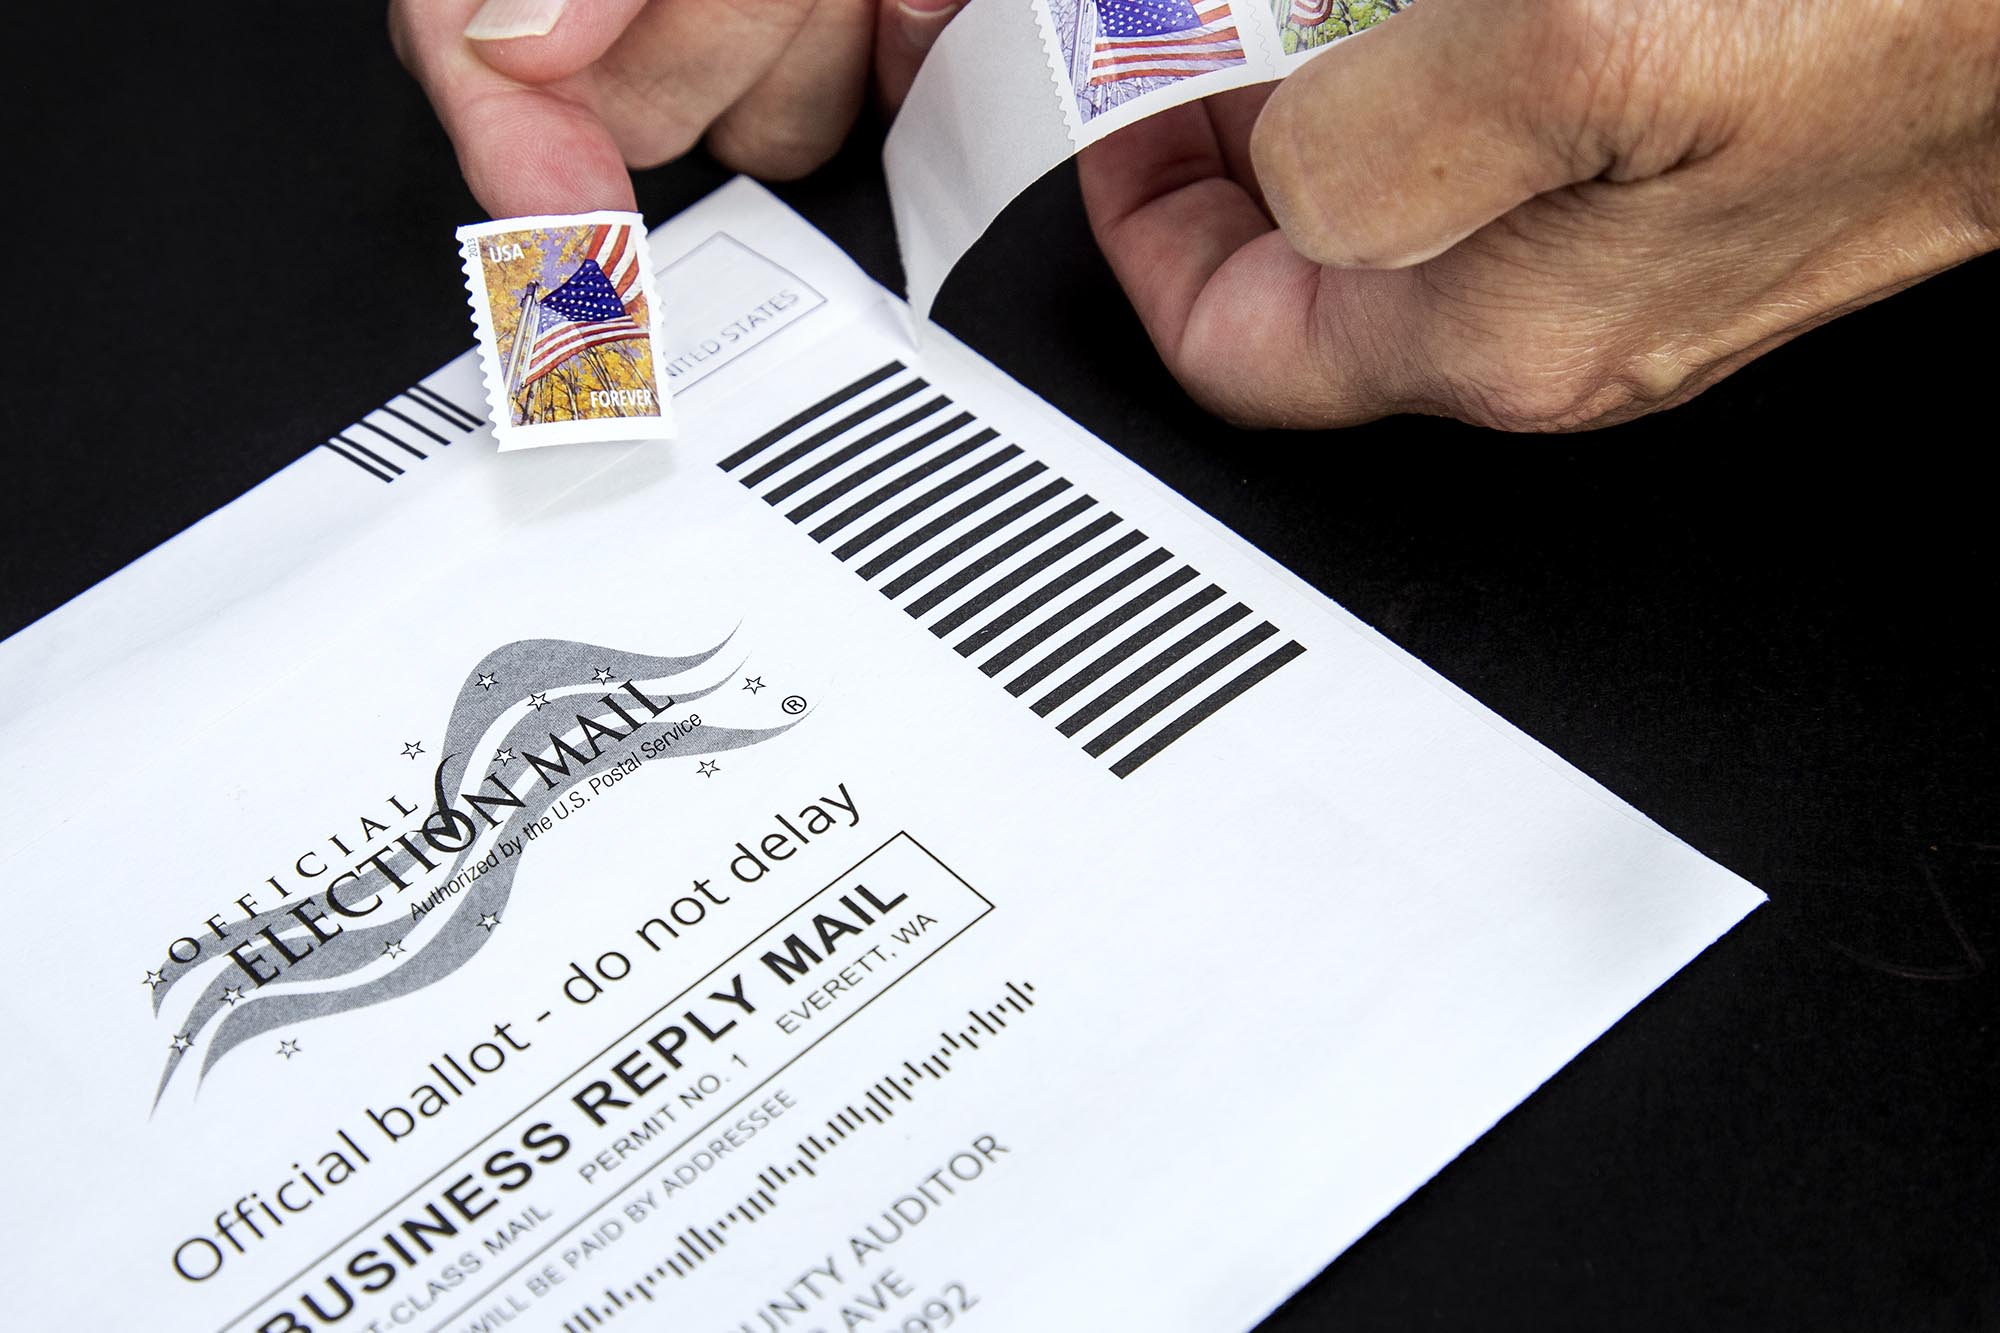 Person placing a stamp on a Ballot